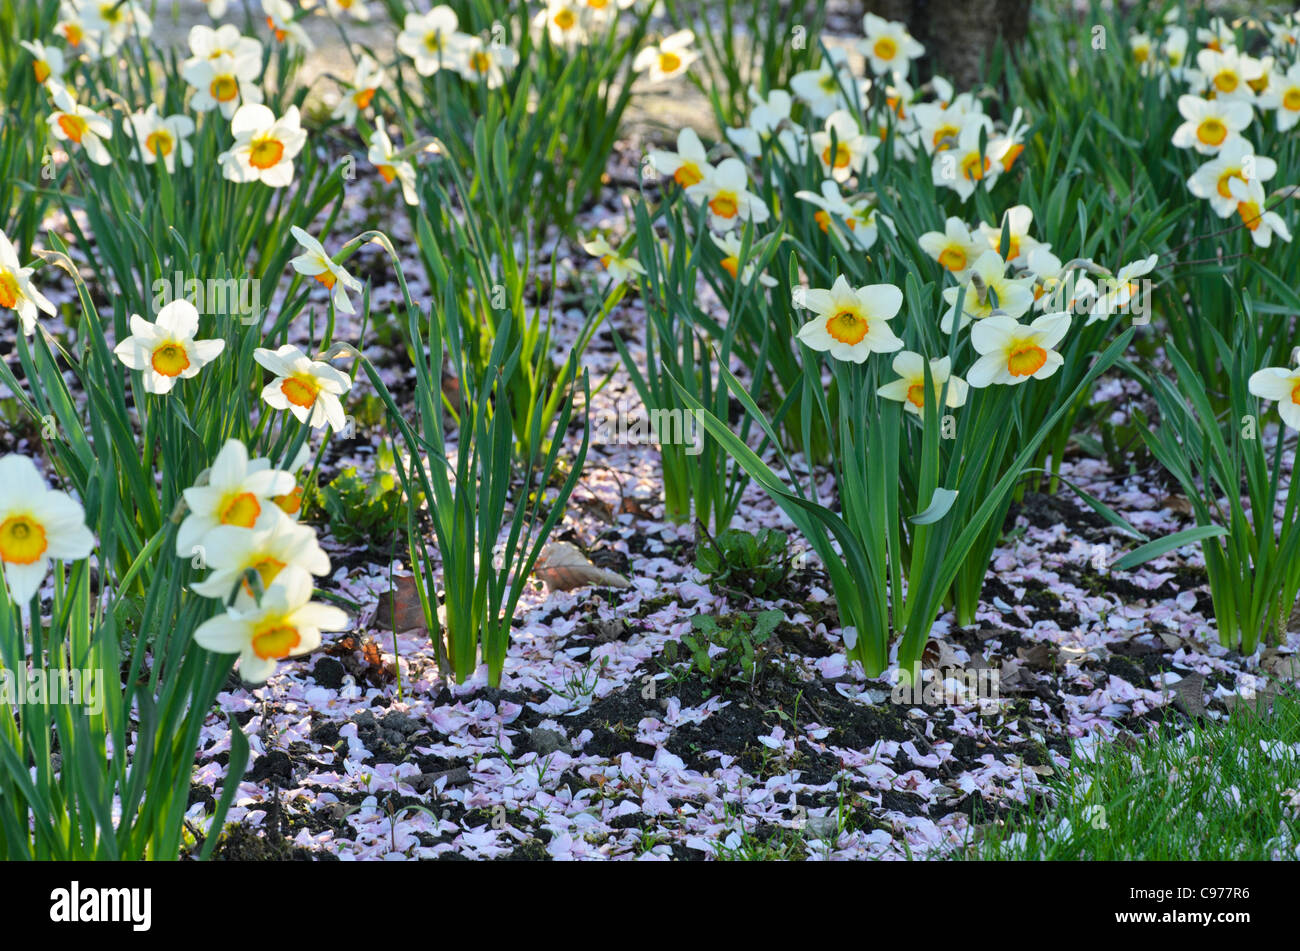 Daffodils (Narcissus) with cherry flowers Stock Photo